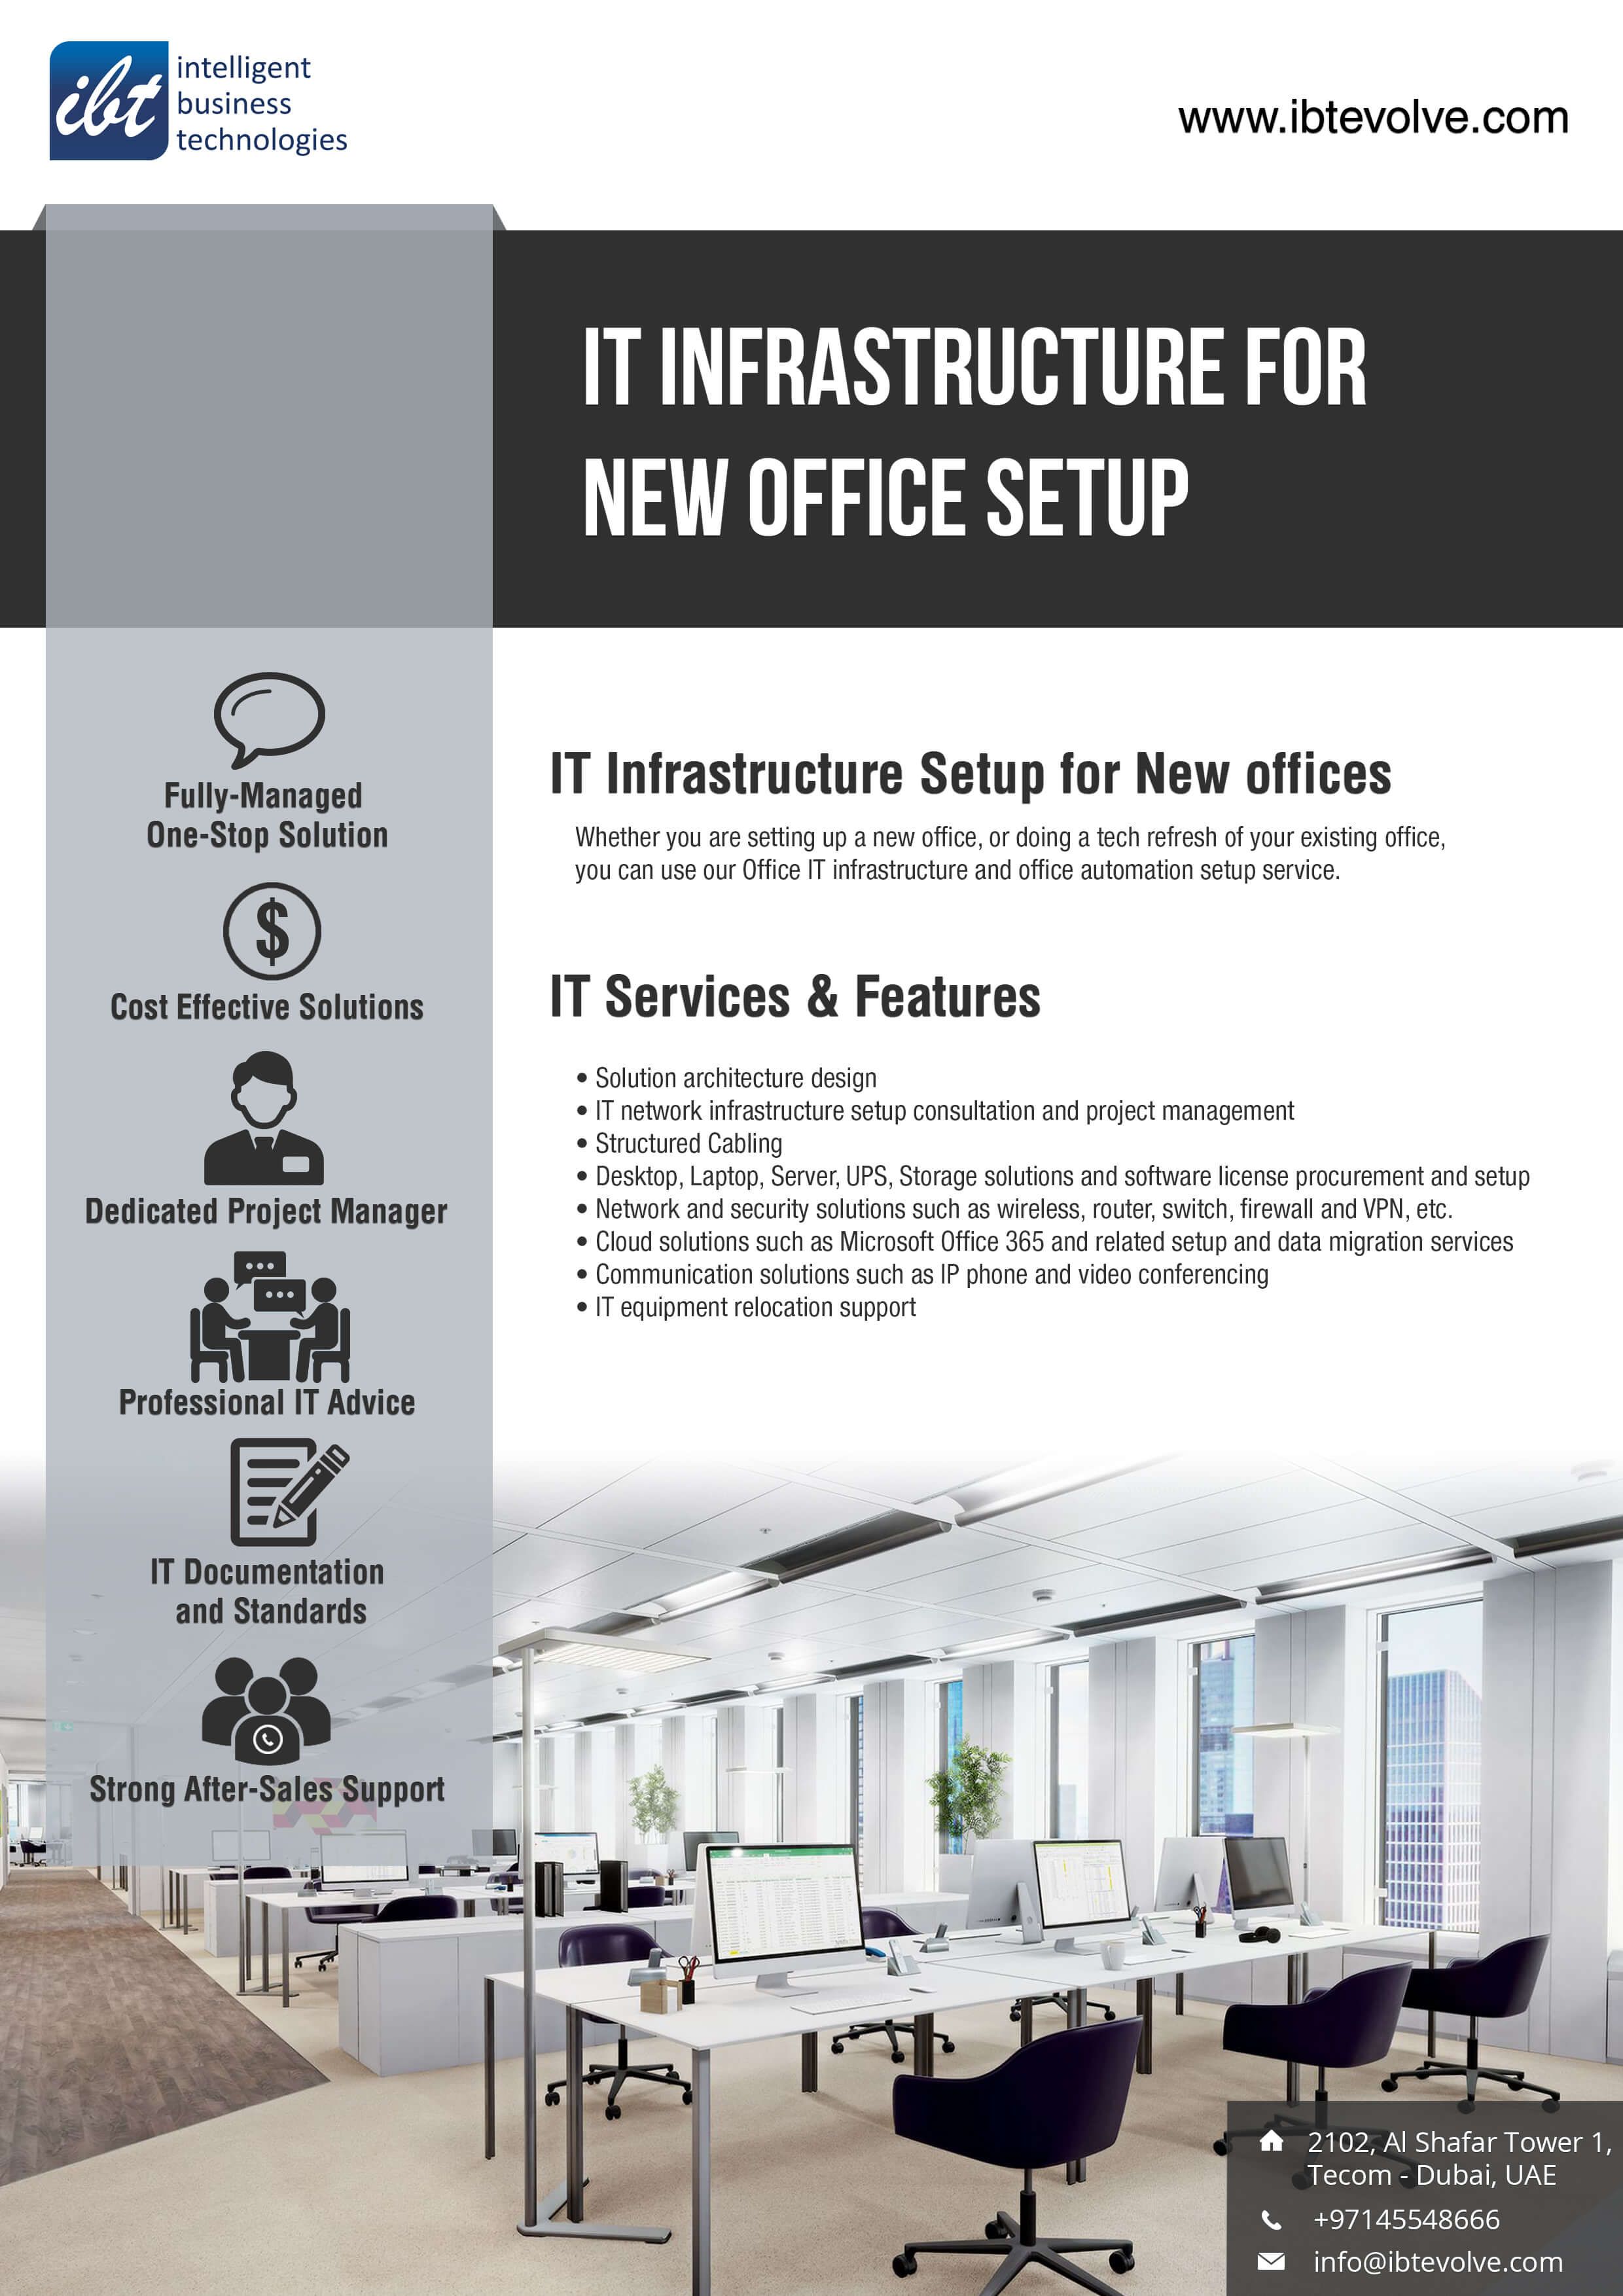 IT Infrastructure for New Business Setup